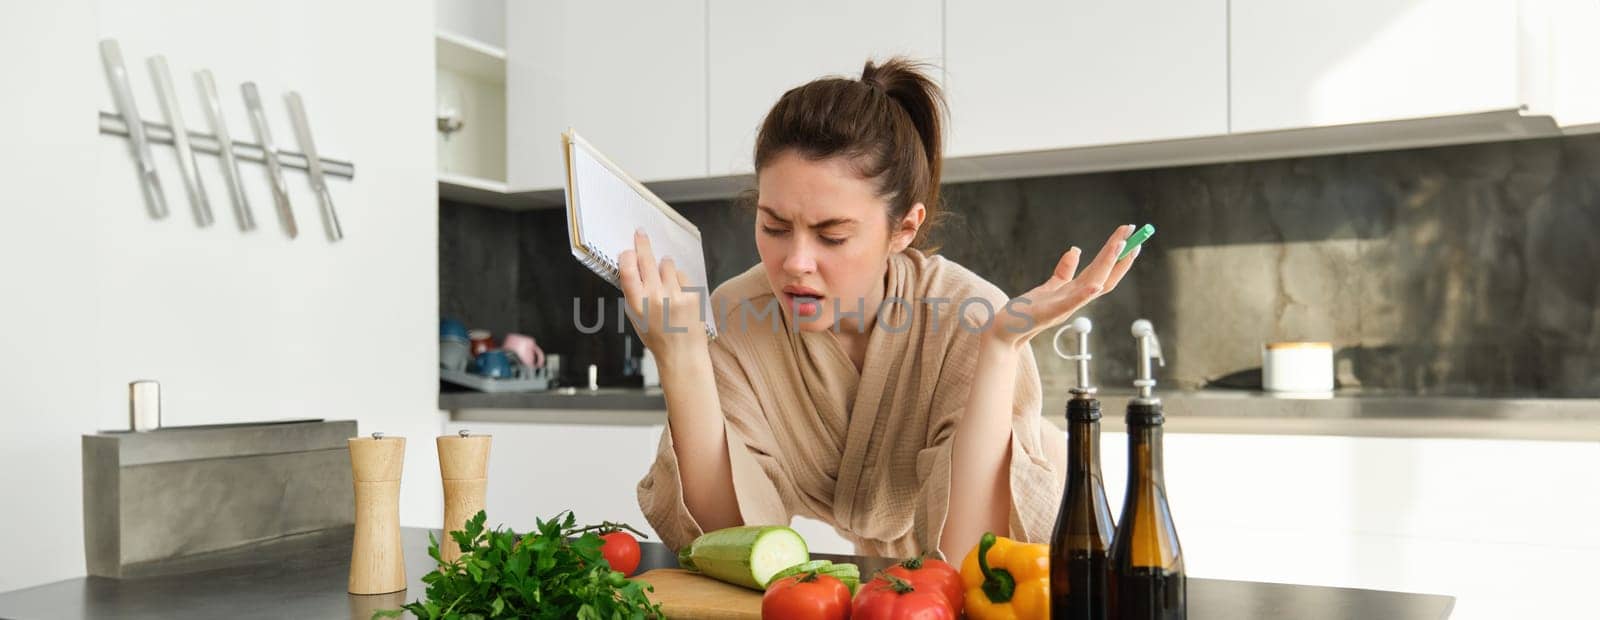 Portrait of woman cant cook, looking confused while making meal, holding recipe book, checking grocery list and staring frustrated at camera, standing near vegetables in the kitchen by Benzoix